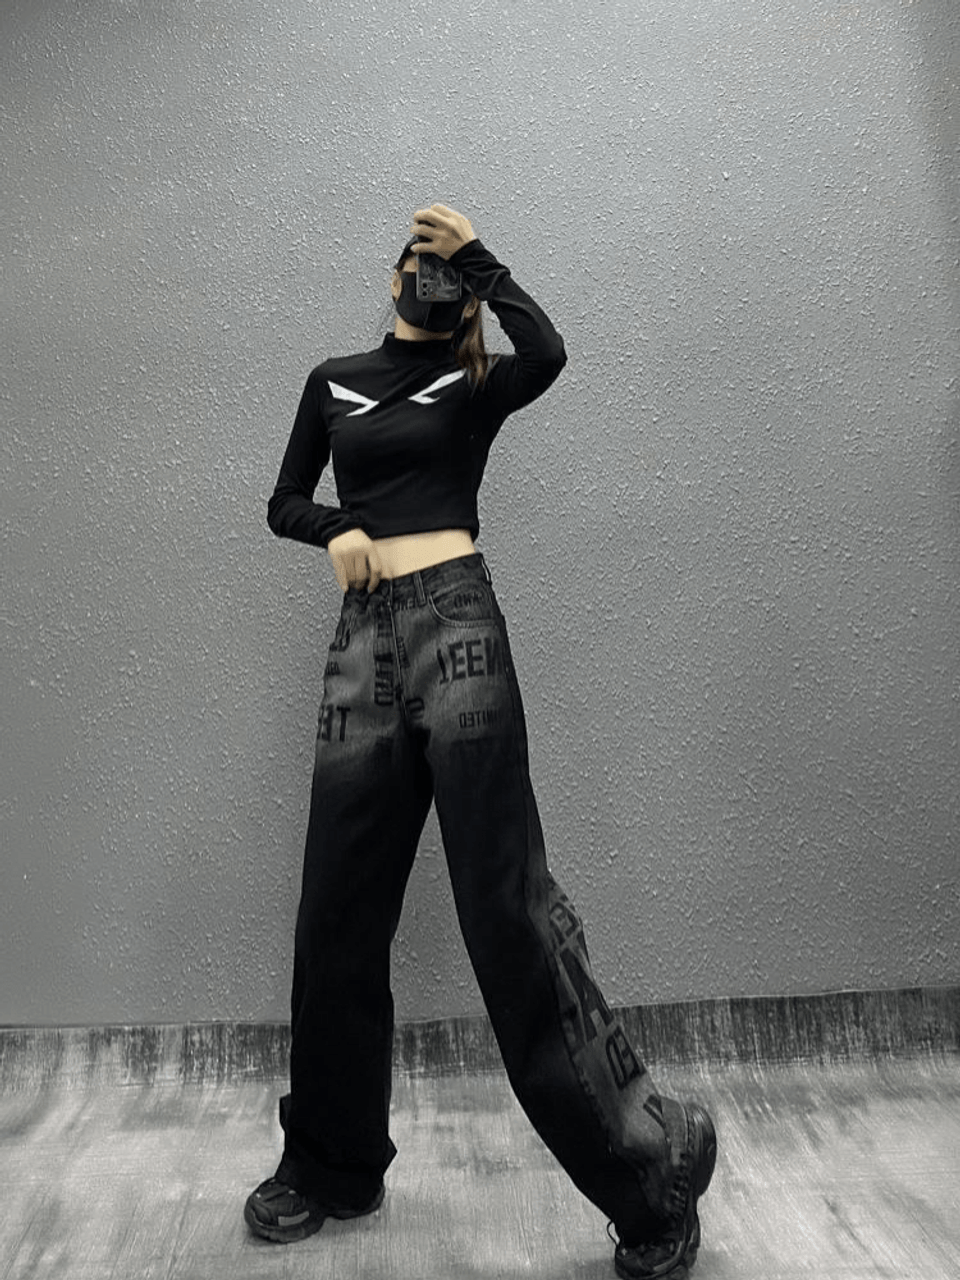 Grunge Aesthetic Extreme Ripped Jeans - Cosmique Studio